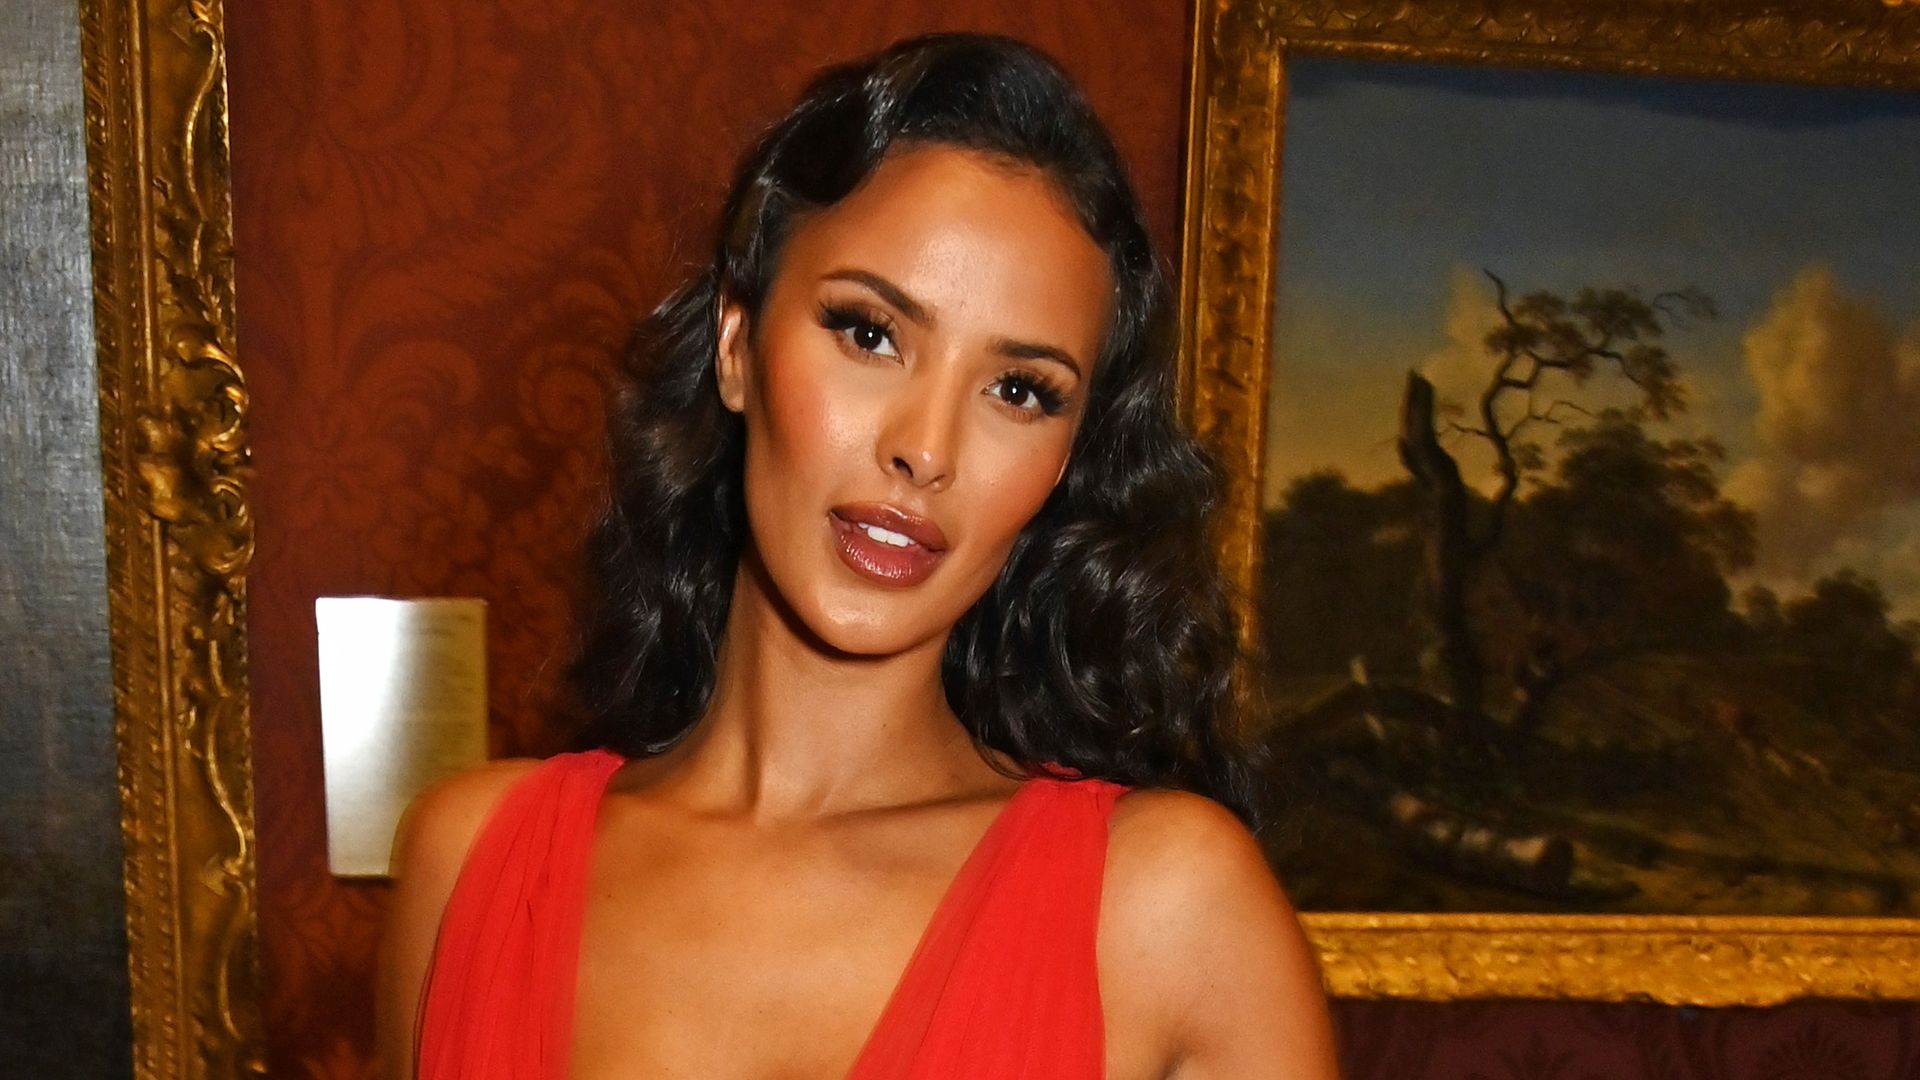 Maya Jama attends the National Gallery's Summer Party 